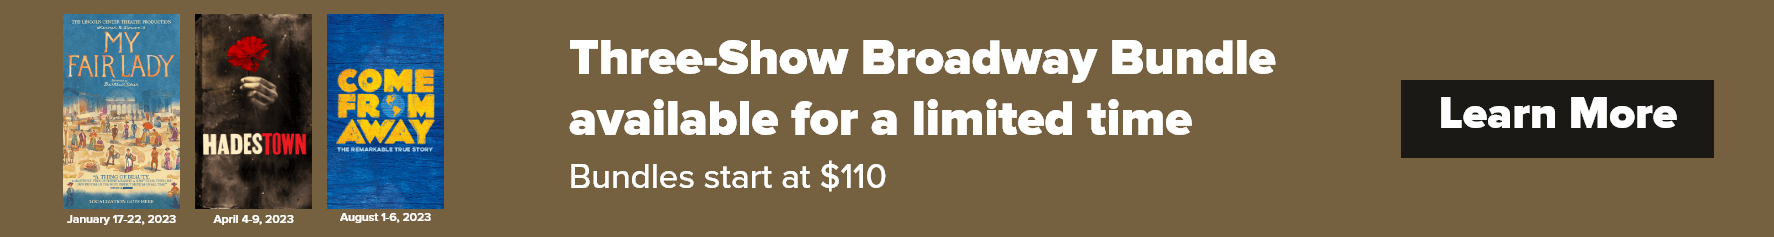 Three-Show Broadway bundle avaiable for a limed time. Bundles start at $110. Click to Learn More. Photo of my fair lady, hadestown, and come from away show posters.